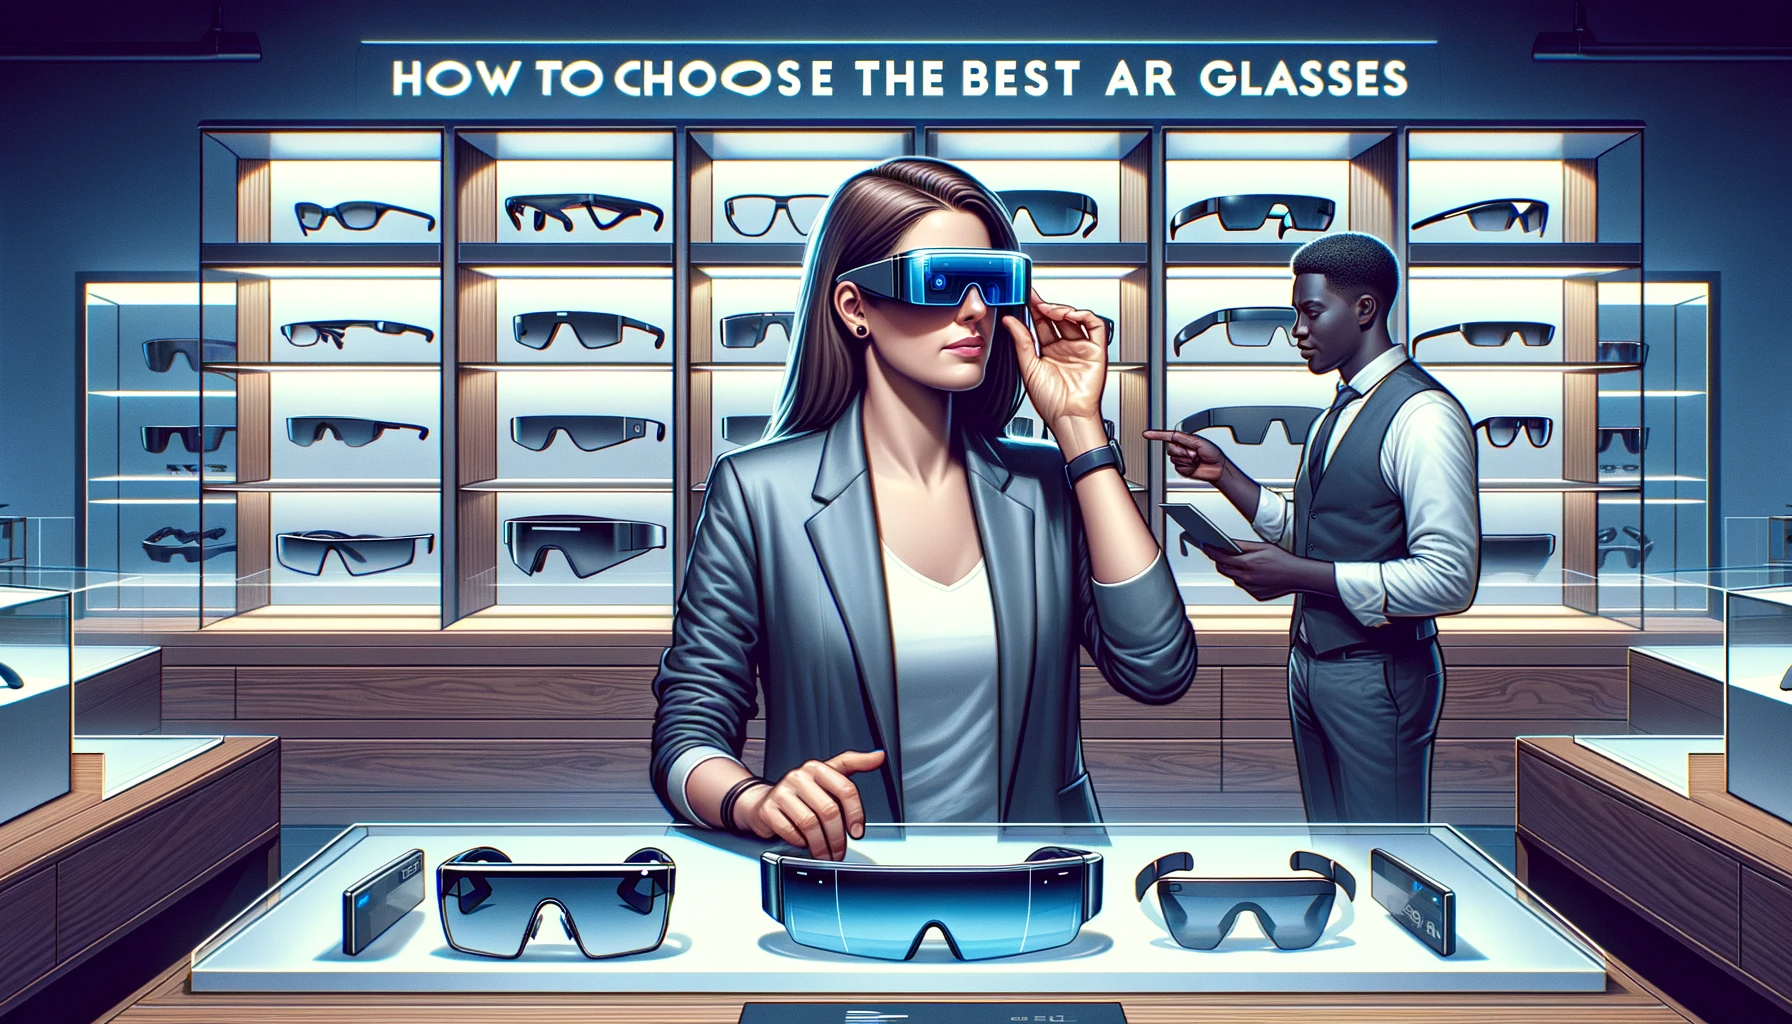 How to choose the best Ar glasses